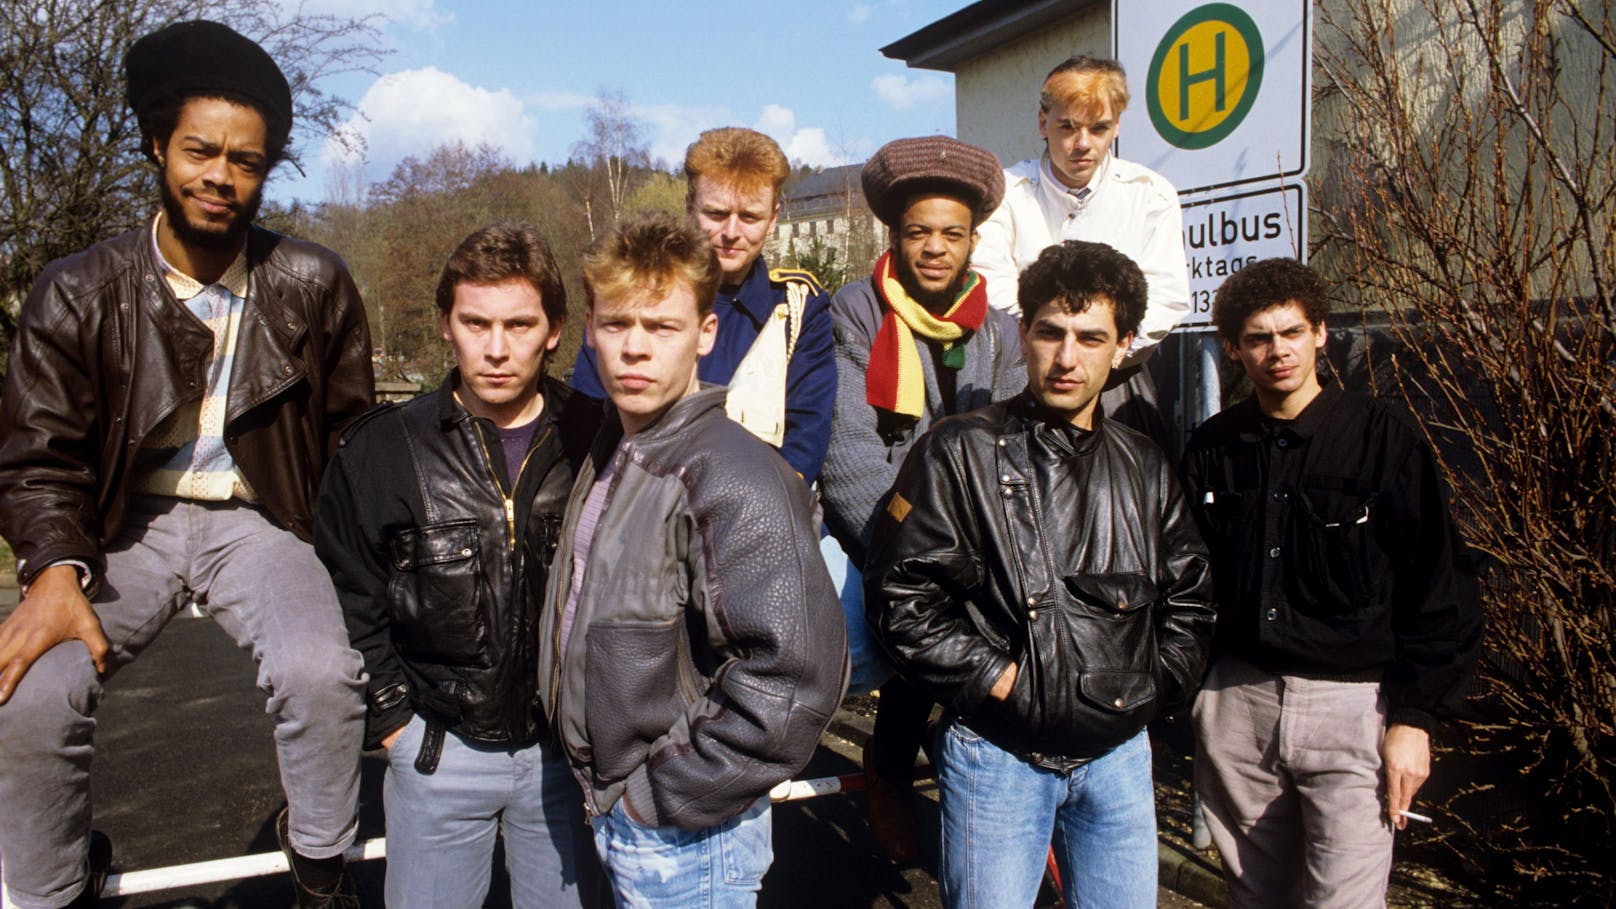 UB40 anno 1984 (v.l. Earl Falconer, Robin Campbell, Alistair Campbell, Brian Travers, Terence, Astro Wilson, Norman Lamount Hassan, Michael Virtue)